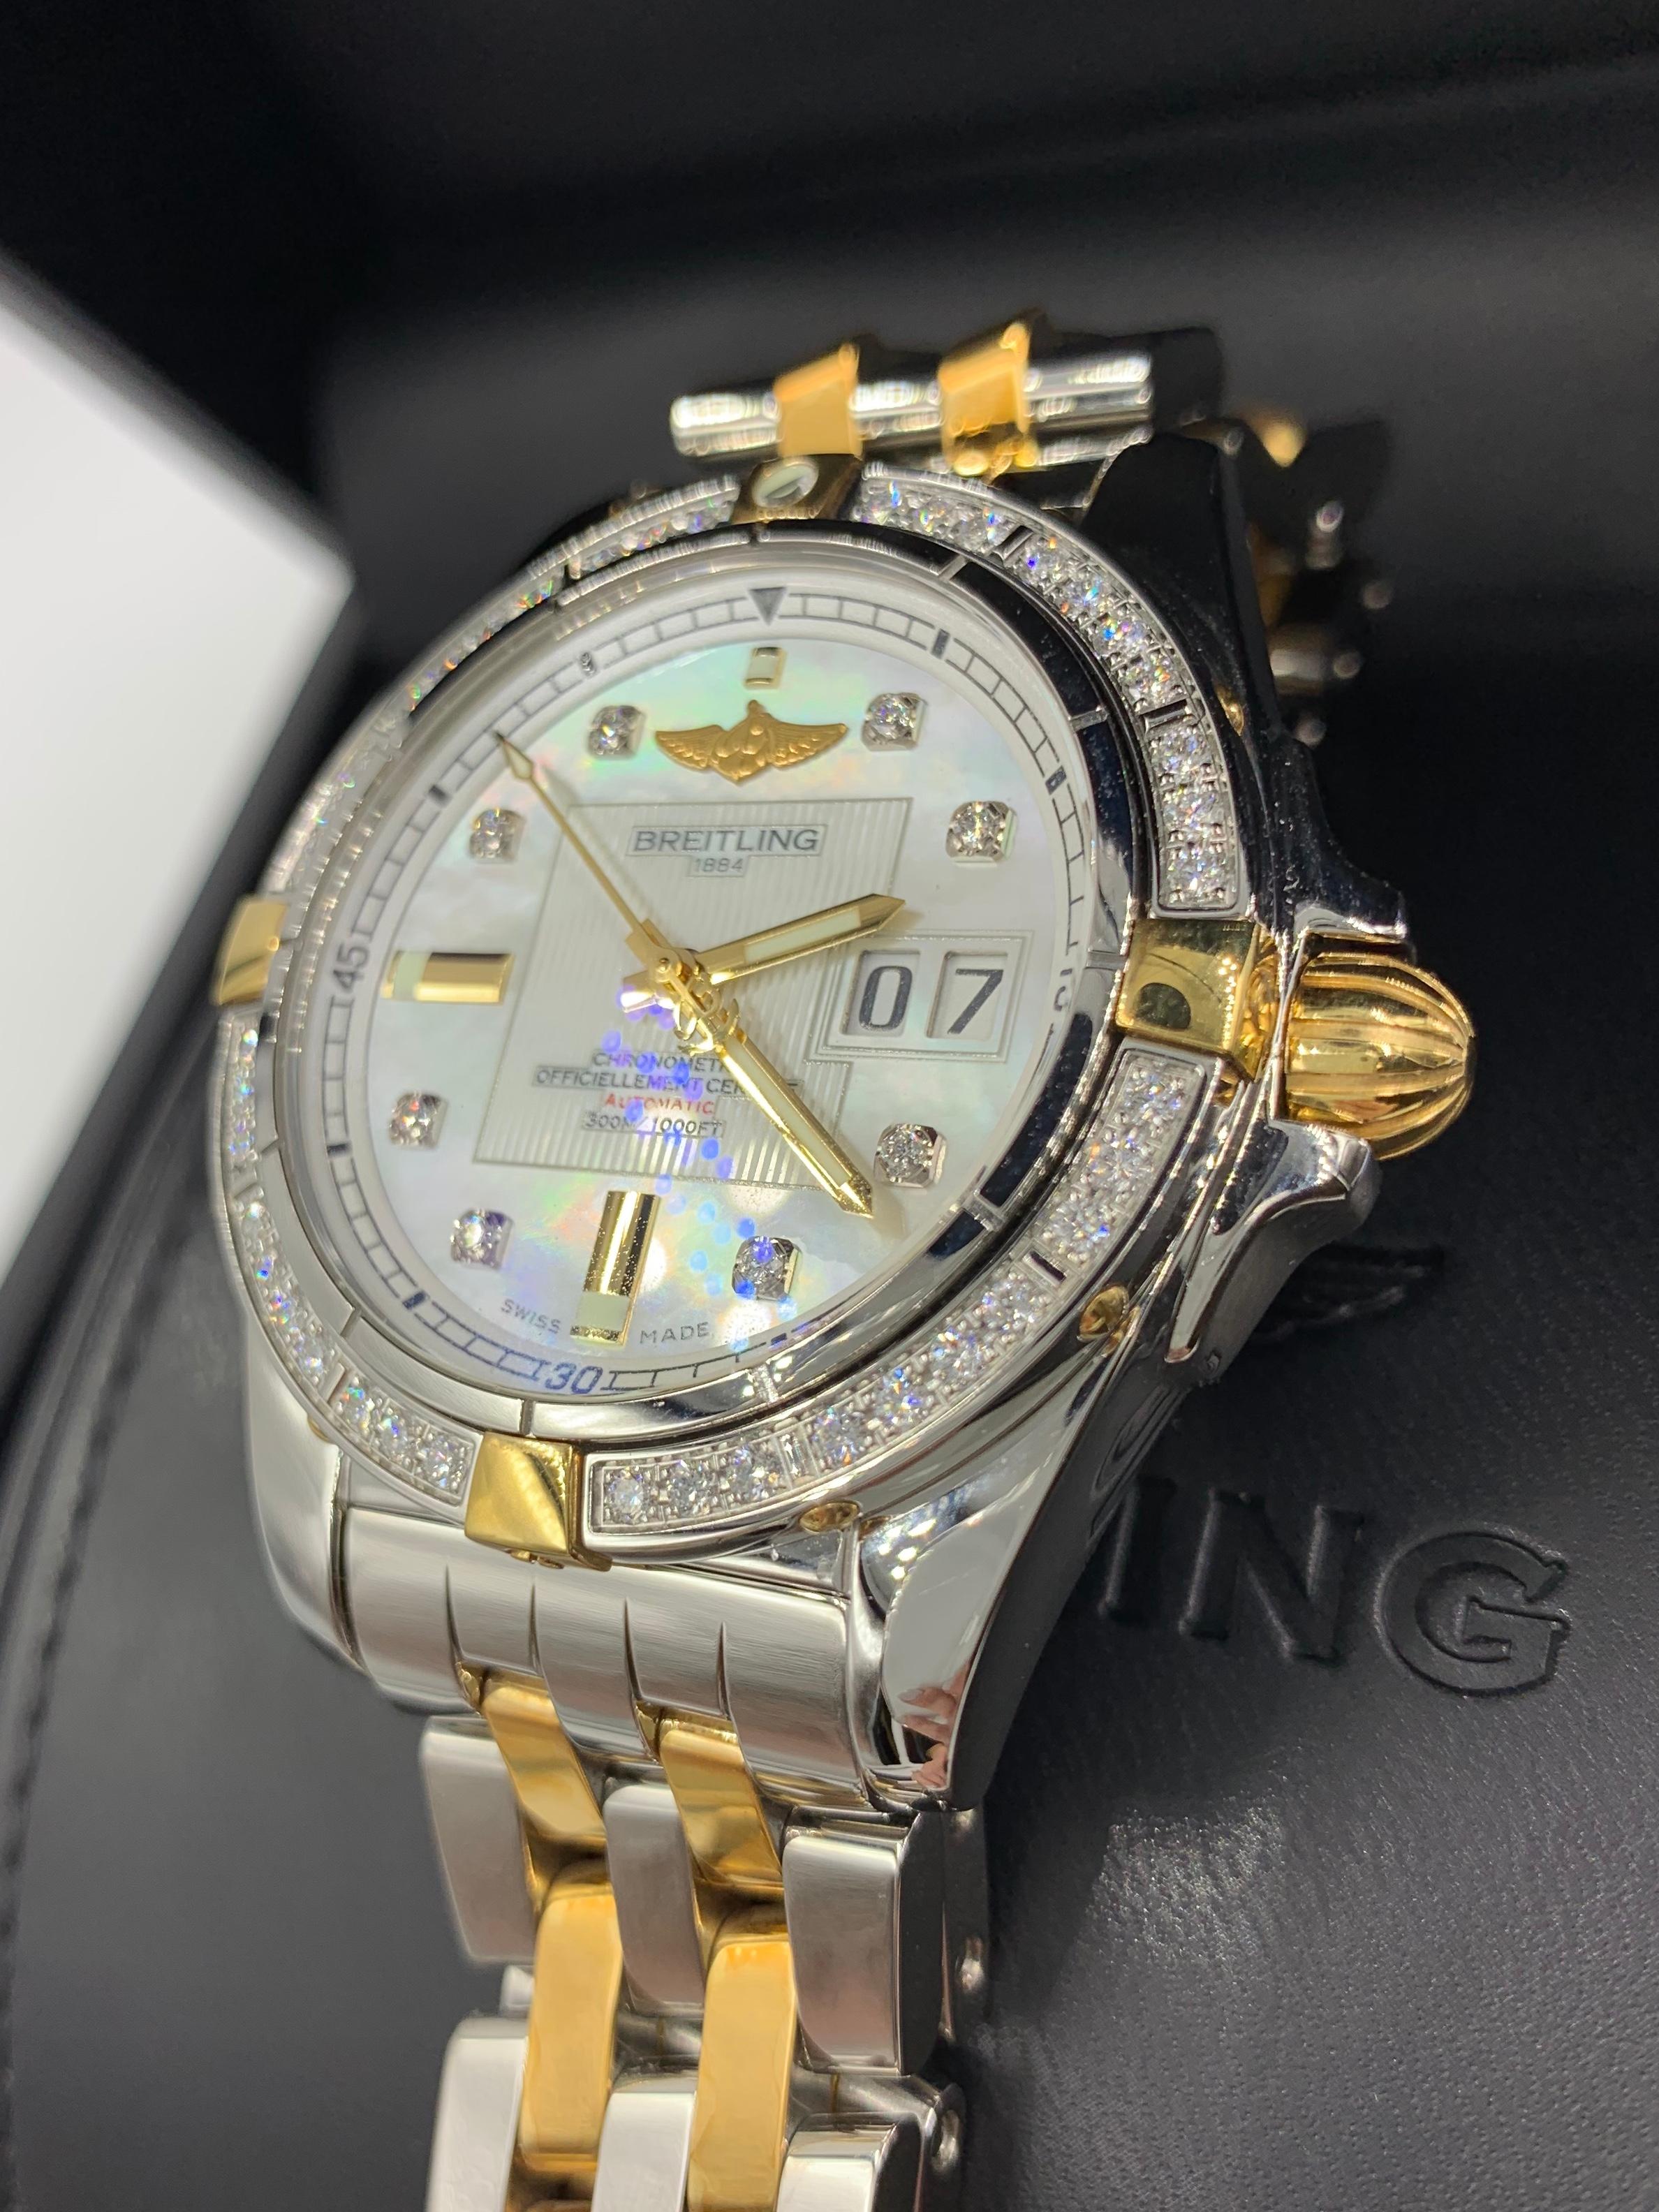 Breitling Cockpit Galactic automatic 41mm made with 18 Karat gold and stainless steel diamond timepiece Model: B49350LA. This Breitling timepiece features a mother of pearl dial, diamond hour marks with a large date window at the 3 o'clock and an